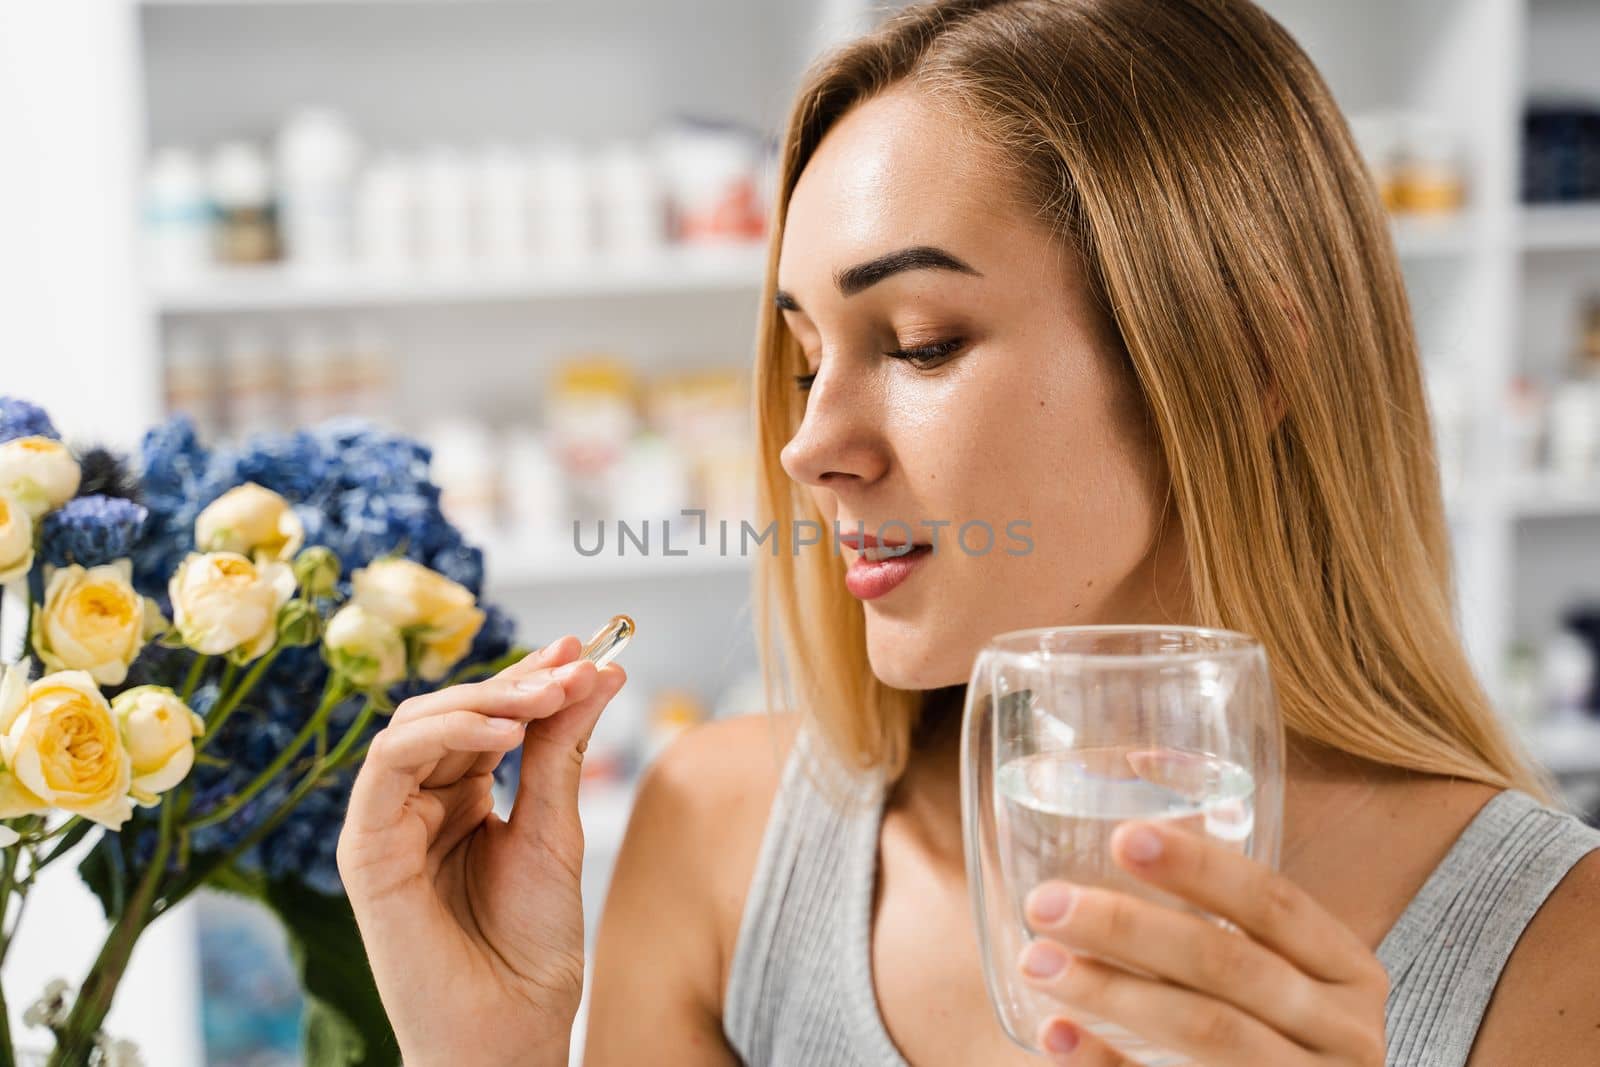 Girl with Omega-3 capsule and cup of water is ready to take a BADS capsule of Omega-3. Biologically active dietary supplements. Taking vitamin D for building and maintaining healthy bones. by Rabizo